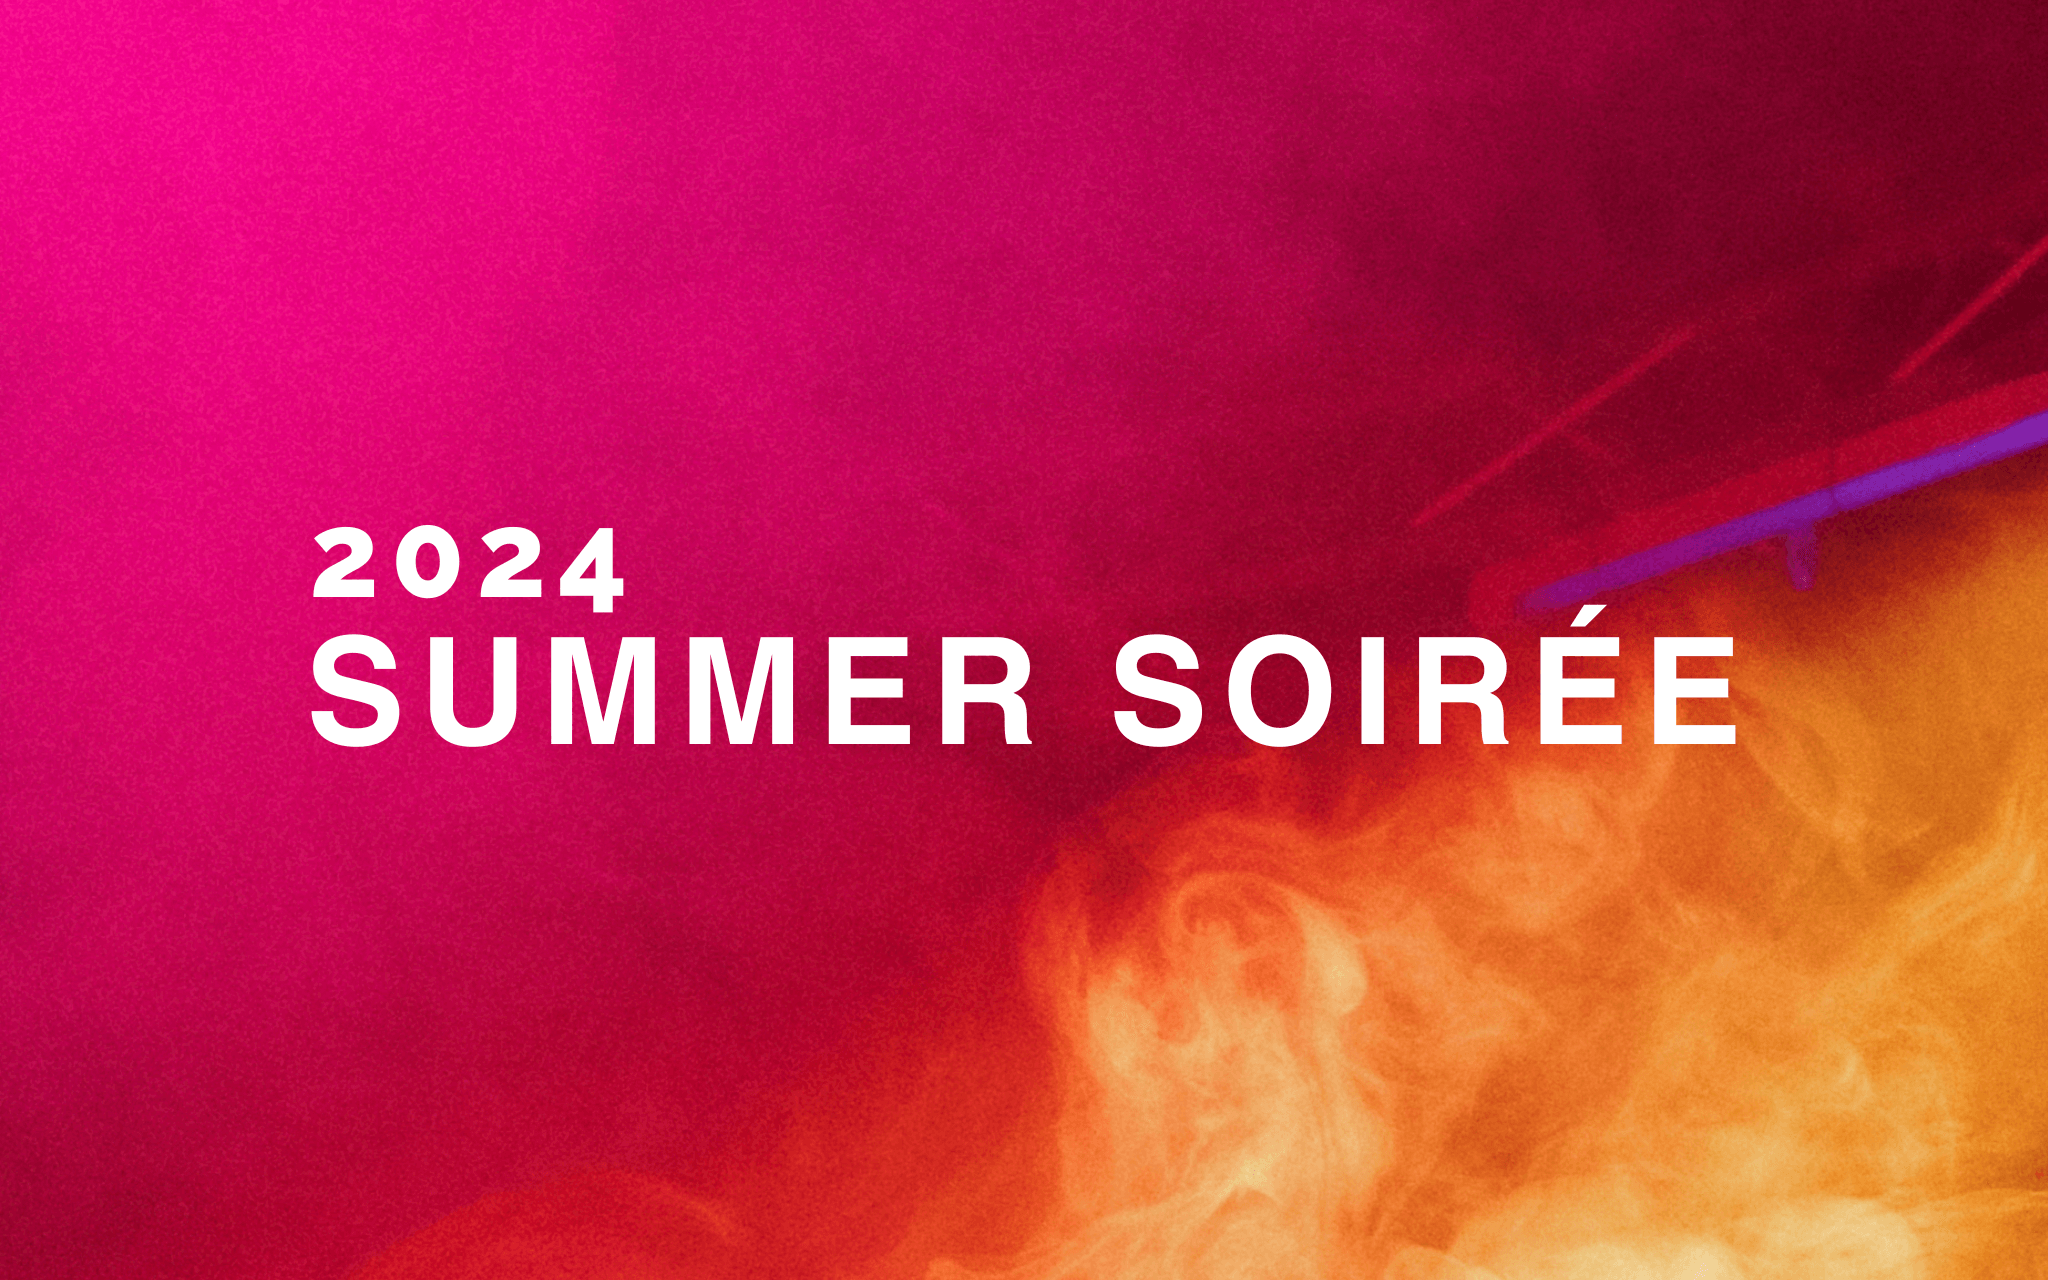 A hazy nightclub setting with and orange lights reflecting off the haze. Text overlaid reads "2024 Summer Soiree'.